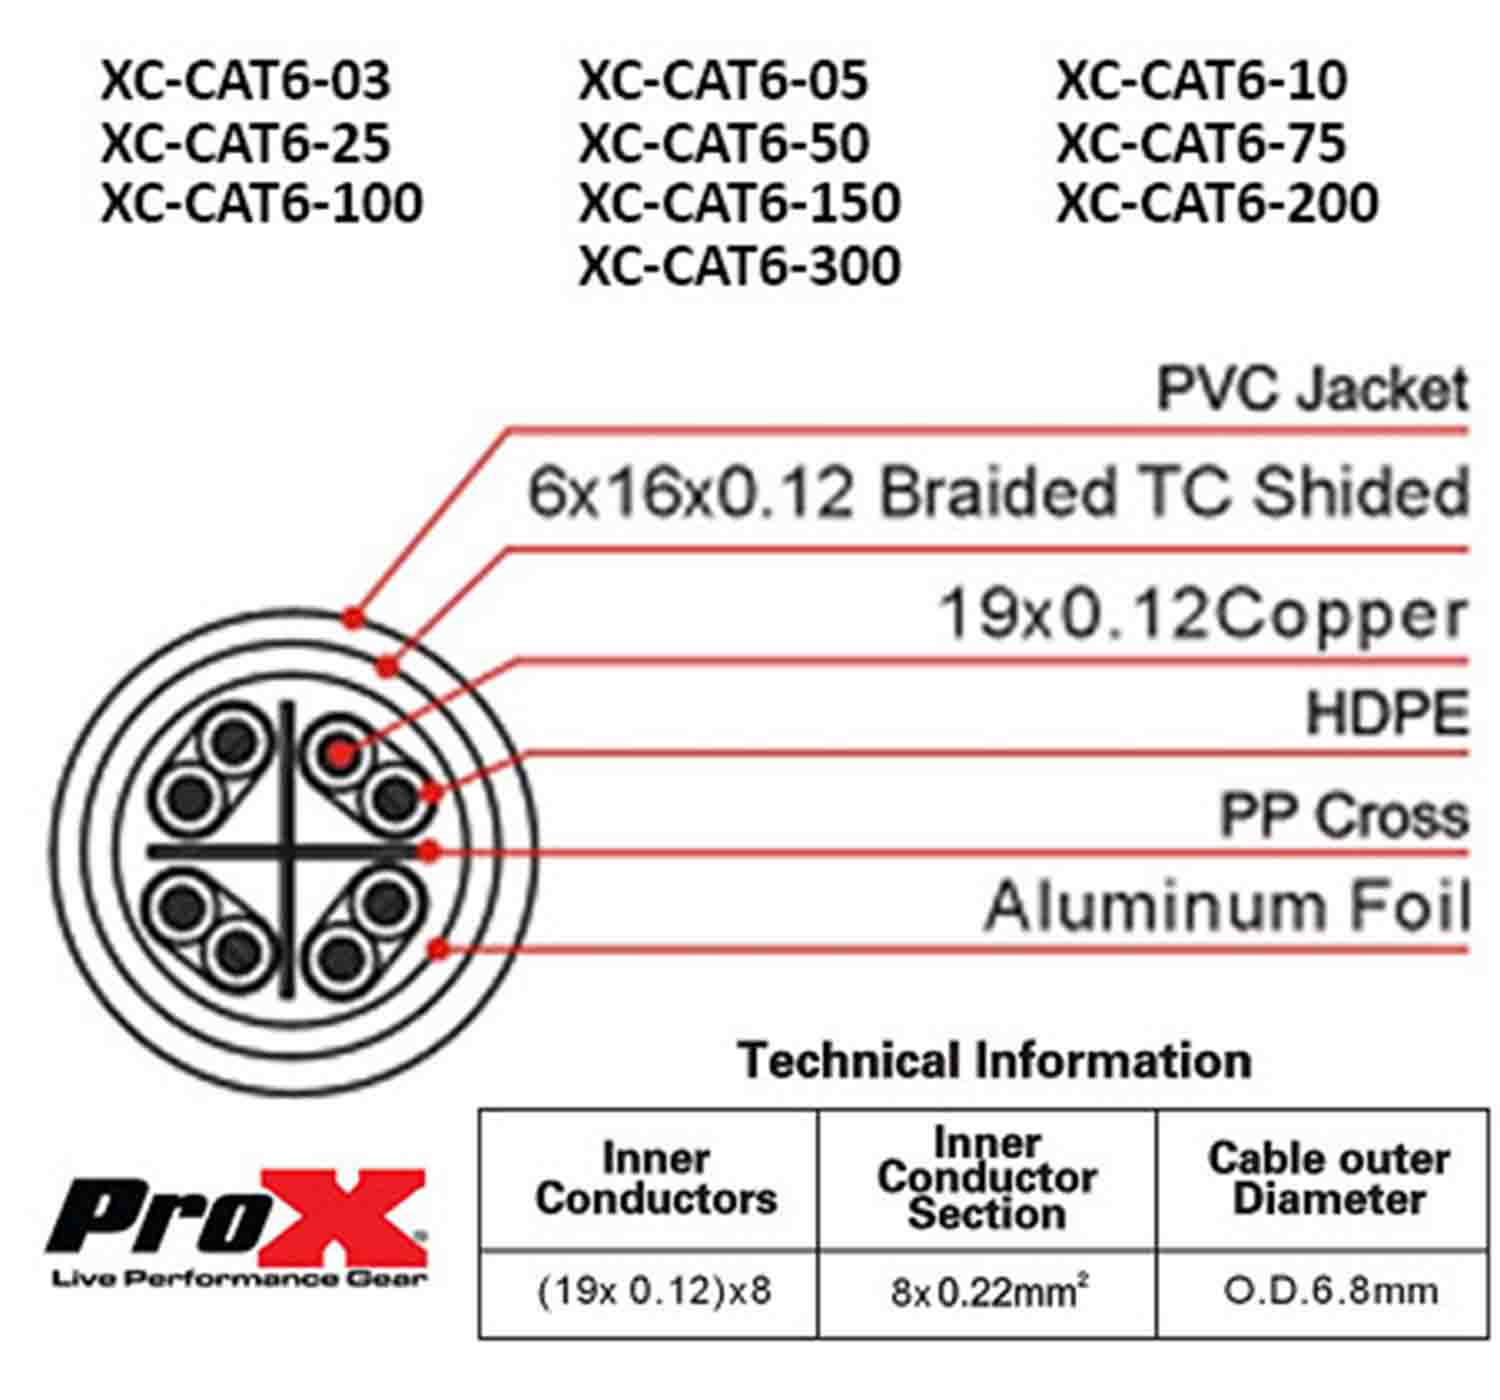 Prox XC-CAT6-10 STP Cat 6 Cable W-RJ45 for Network and Snake Box Connections - 10 Feet - Hollywood DJ